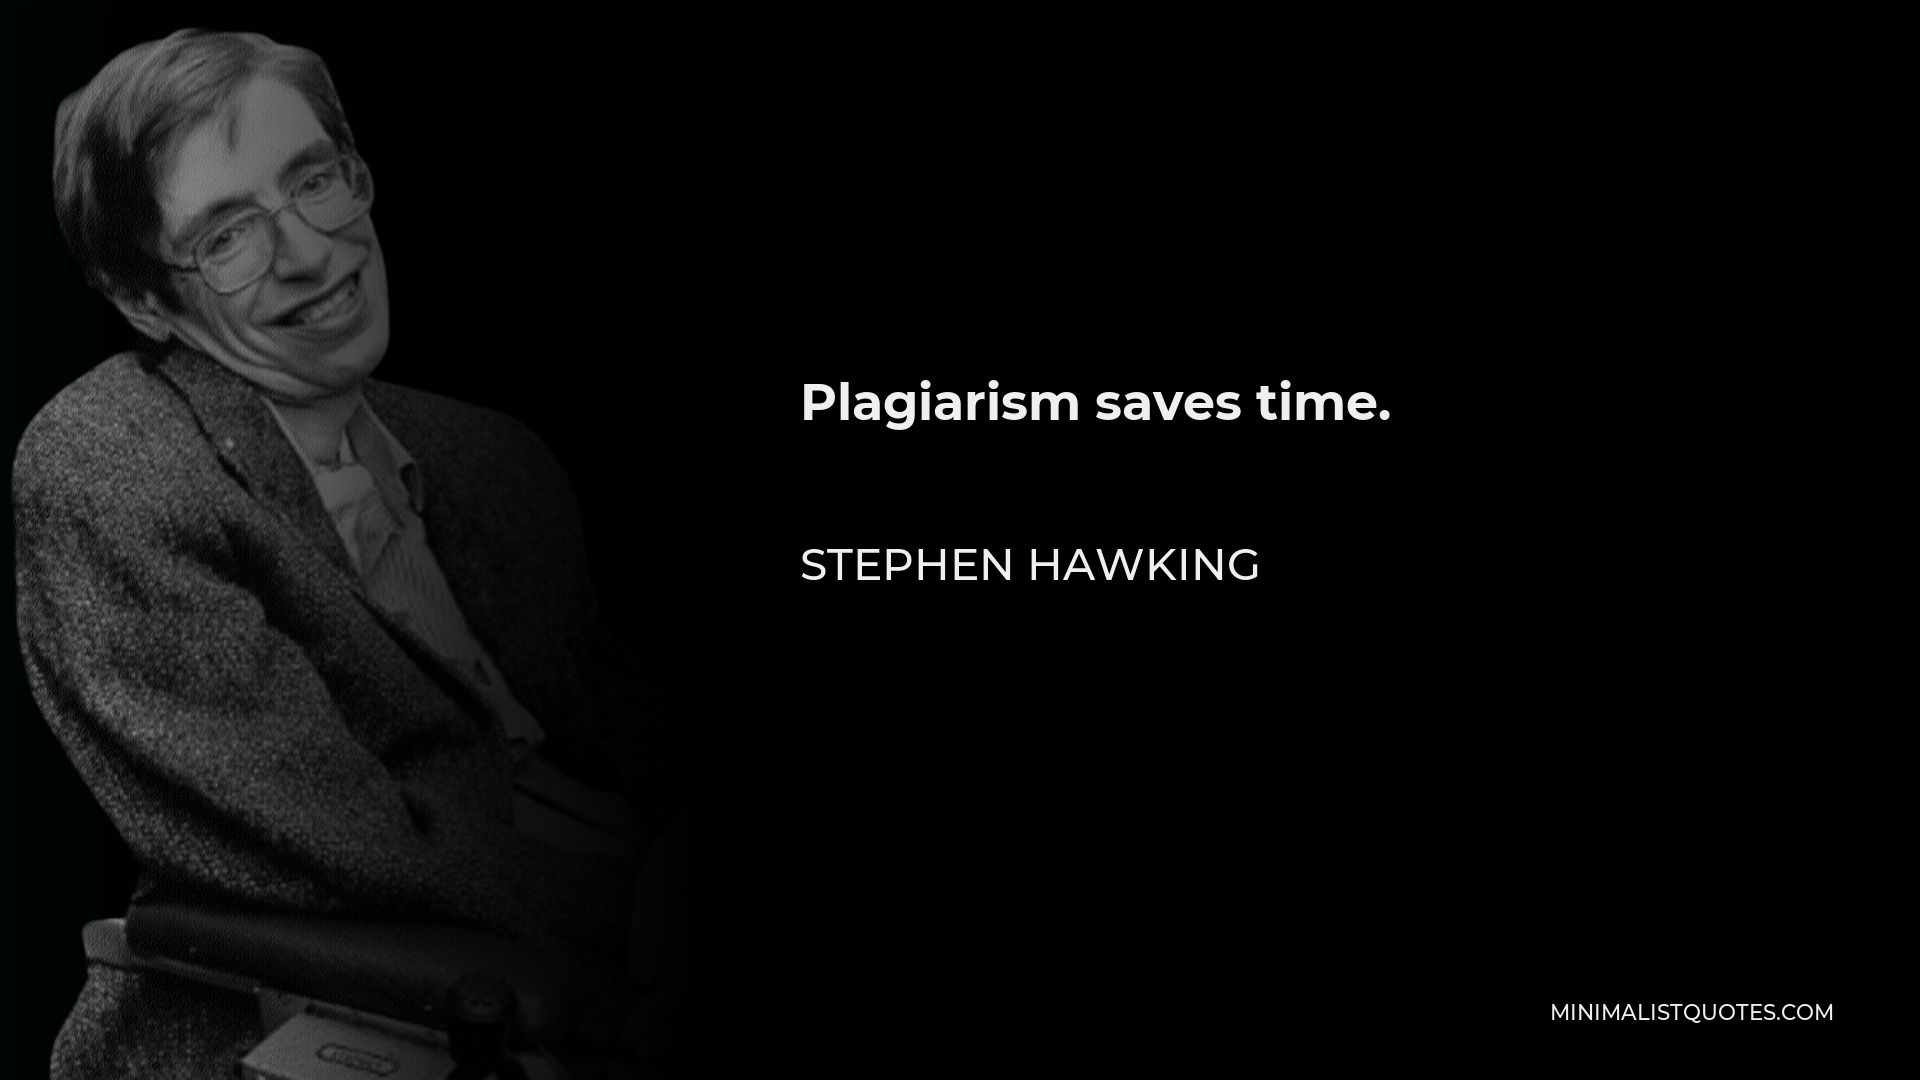 Stephen Hawking Quote: Plagiarism saves time.